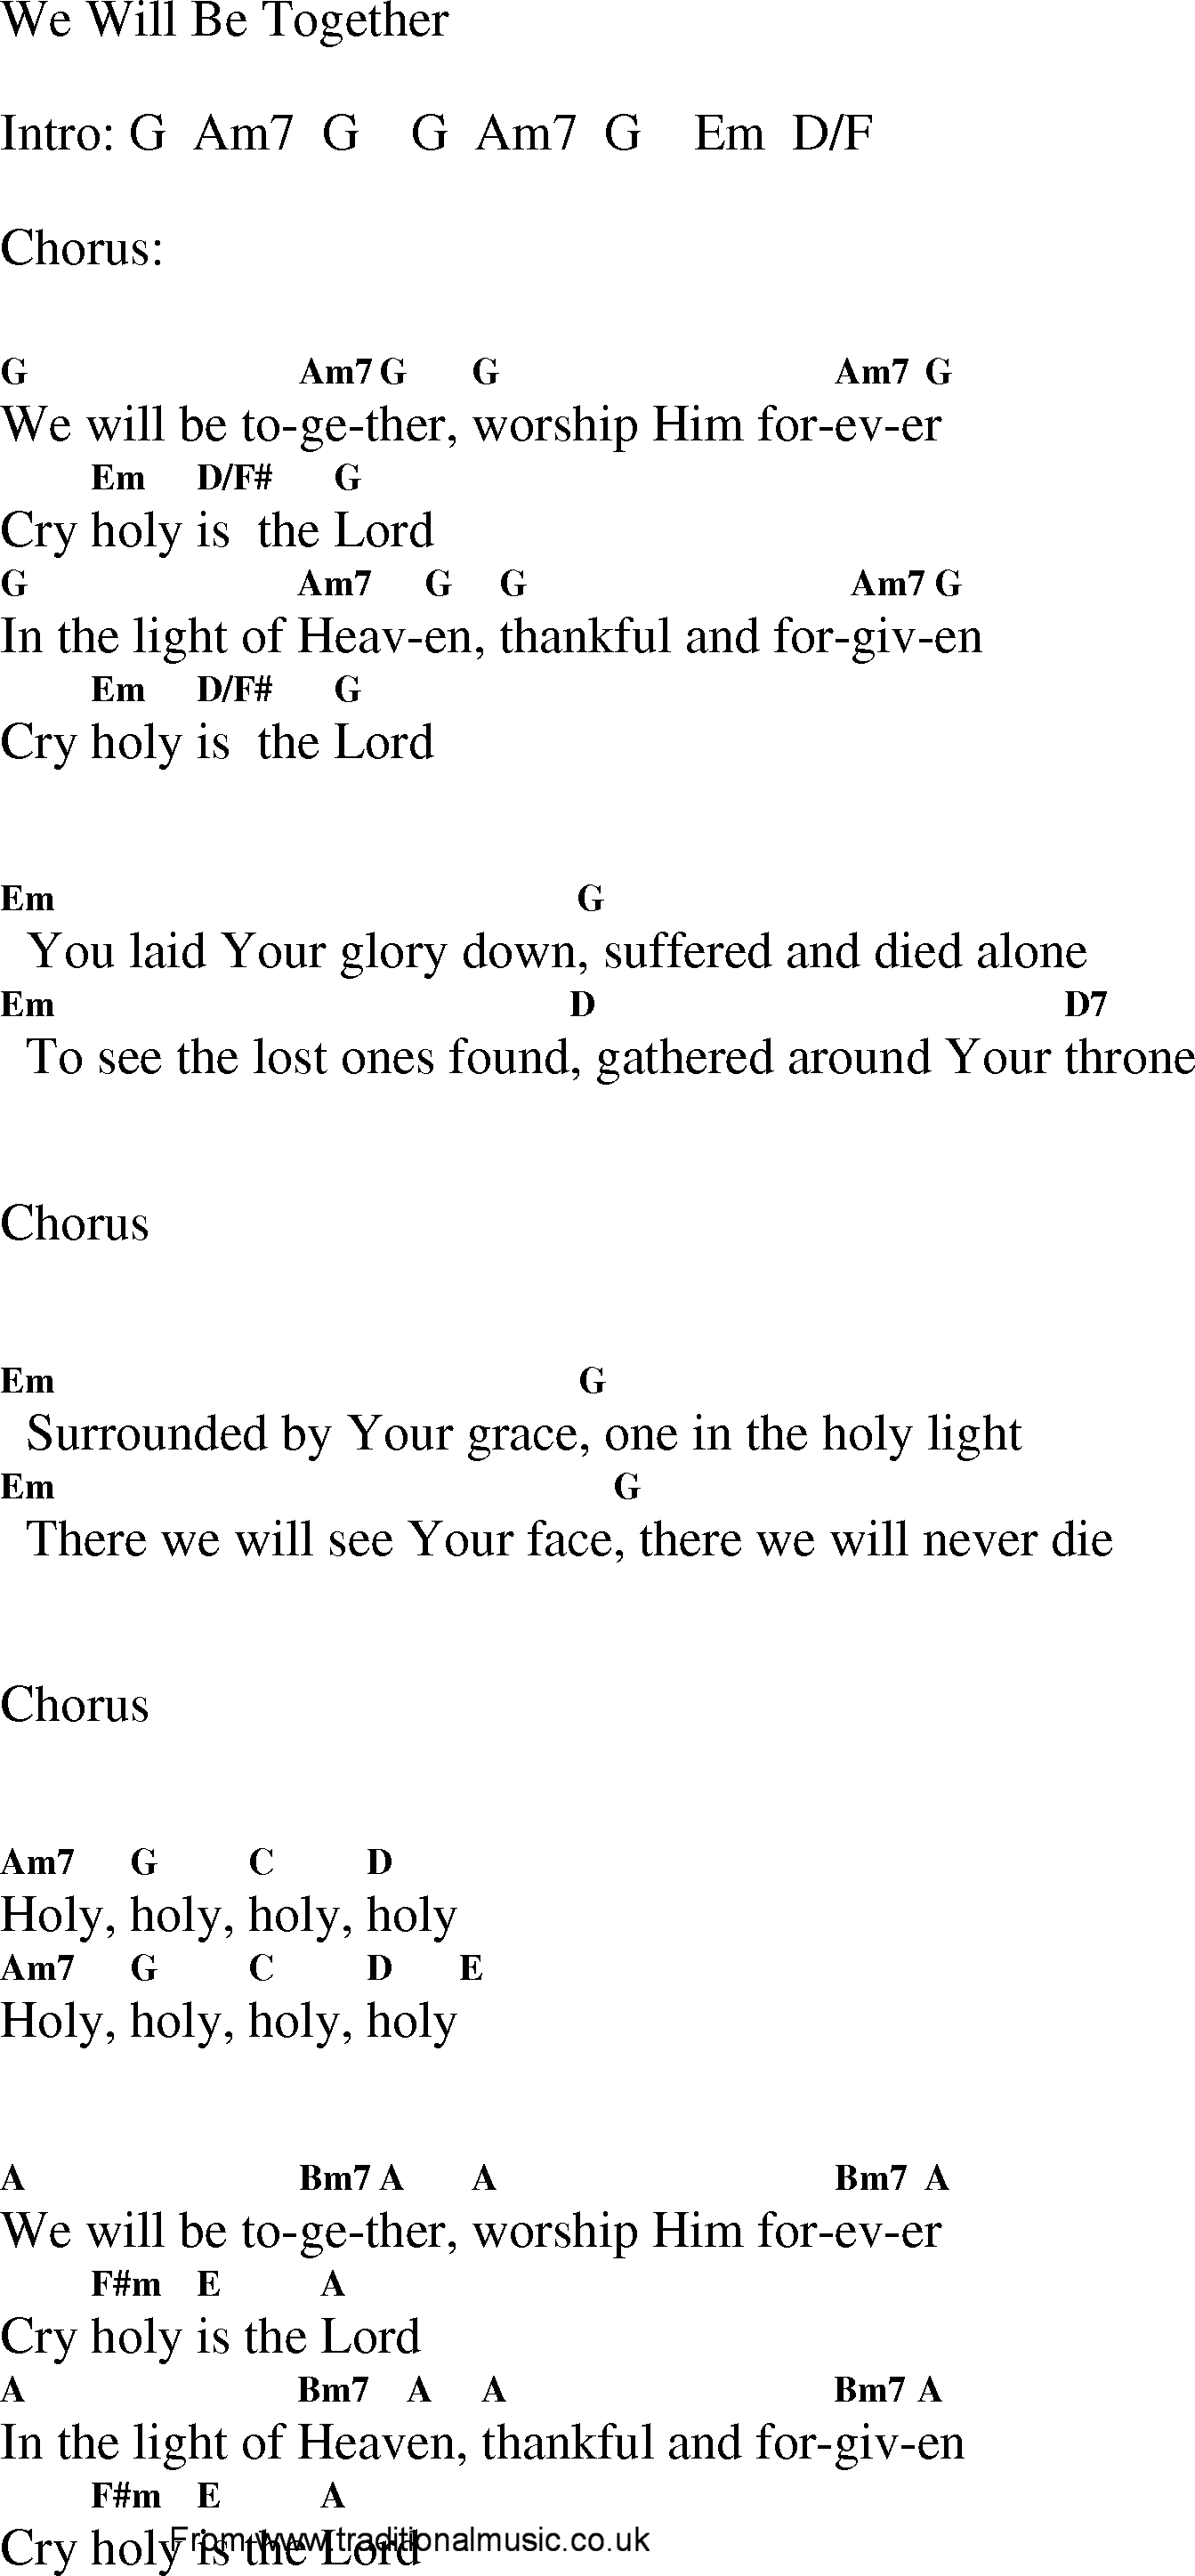 Gospel Song: we_will_be_together, lyrics and chords.